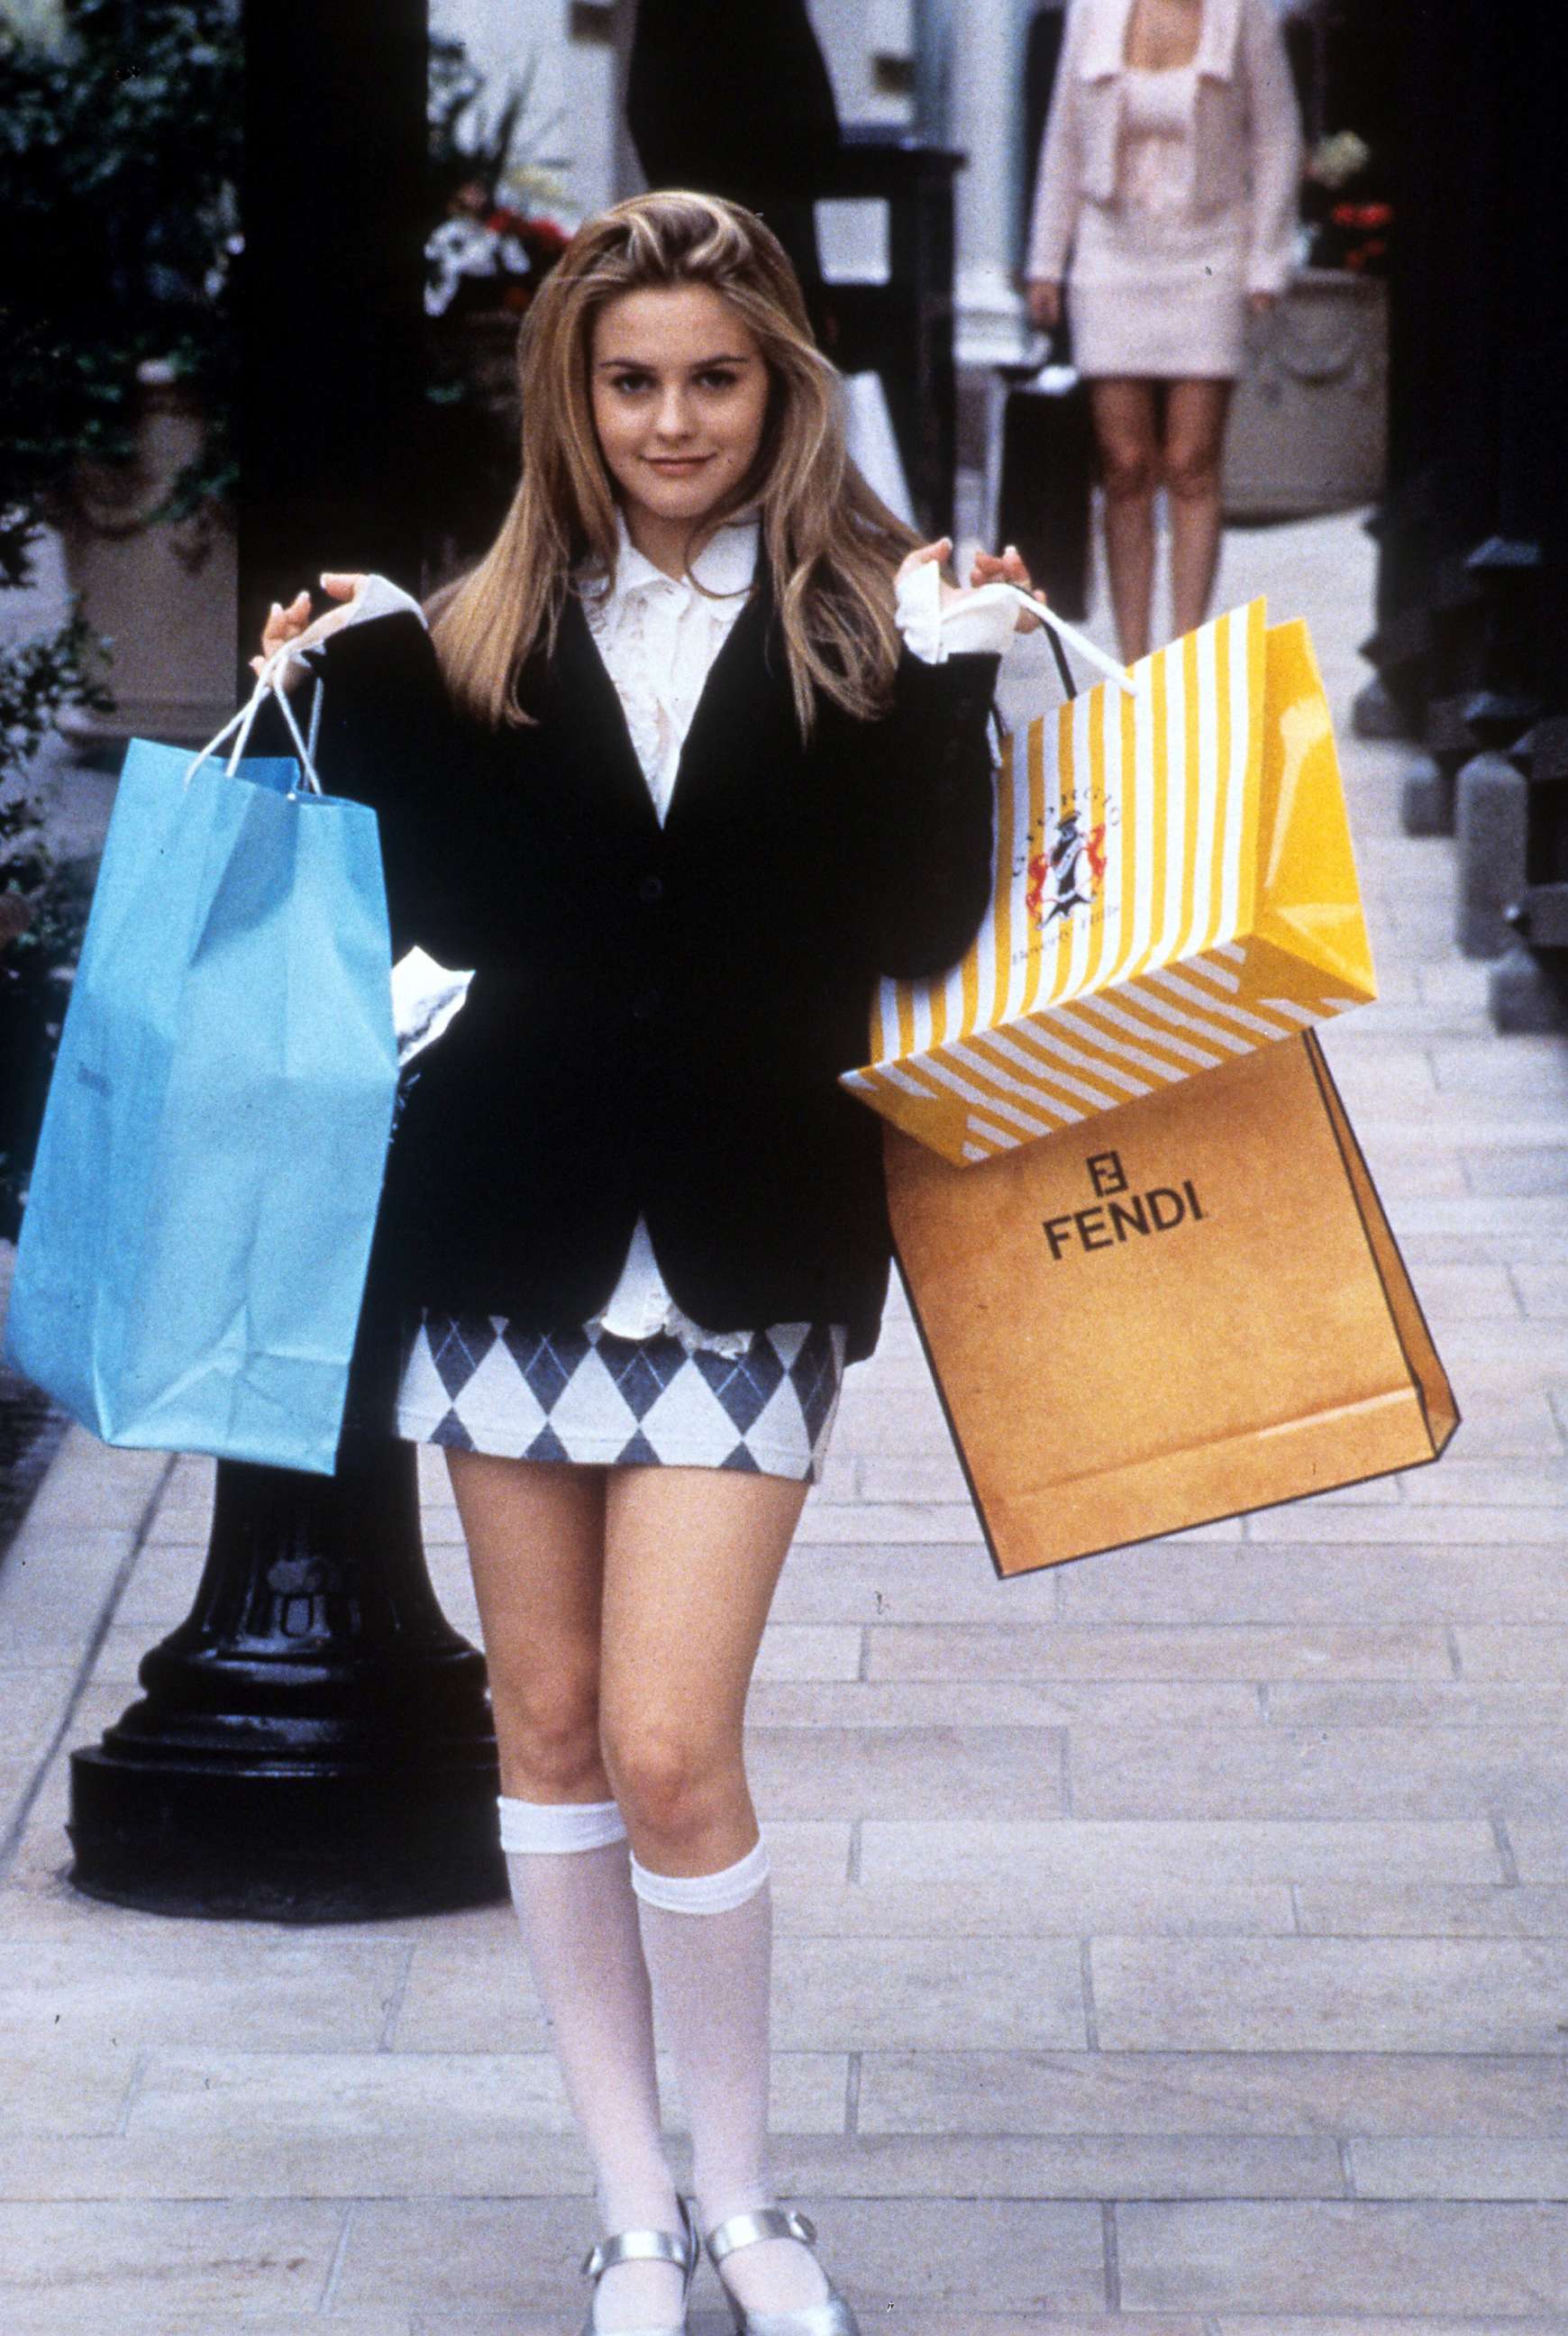 PHOTO: Alicia Silverstone holds shopping bags in a scene from the film "Clueless," 1995.